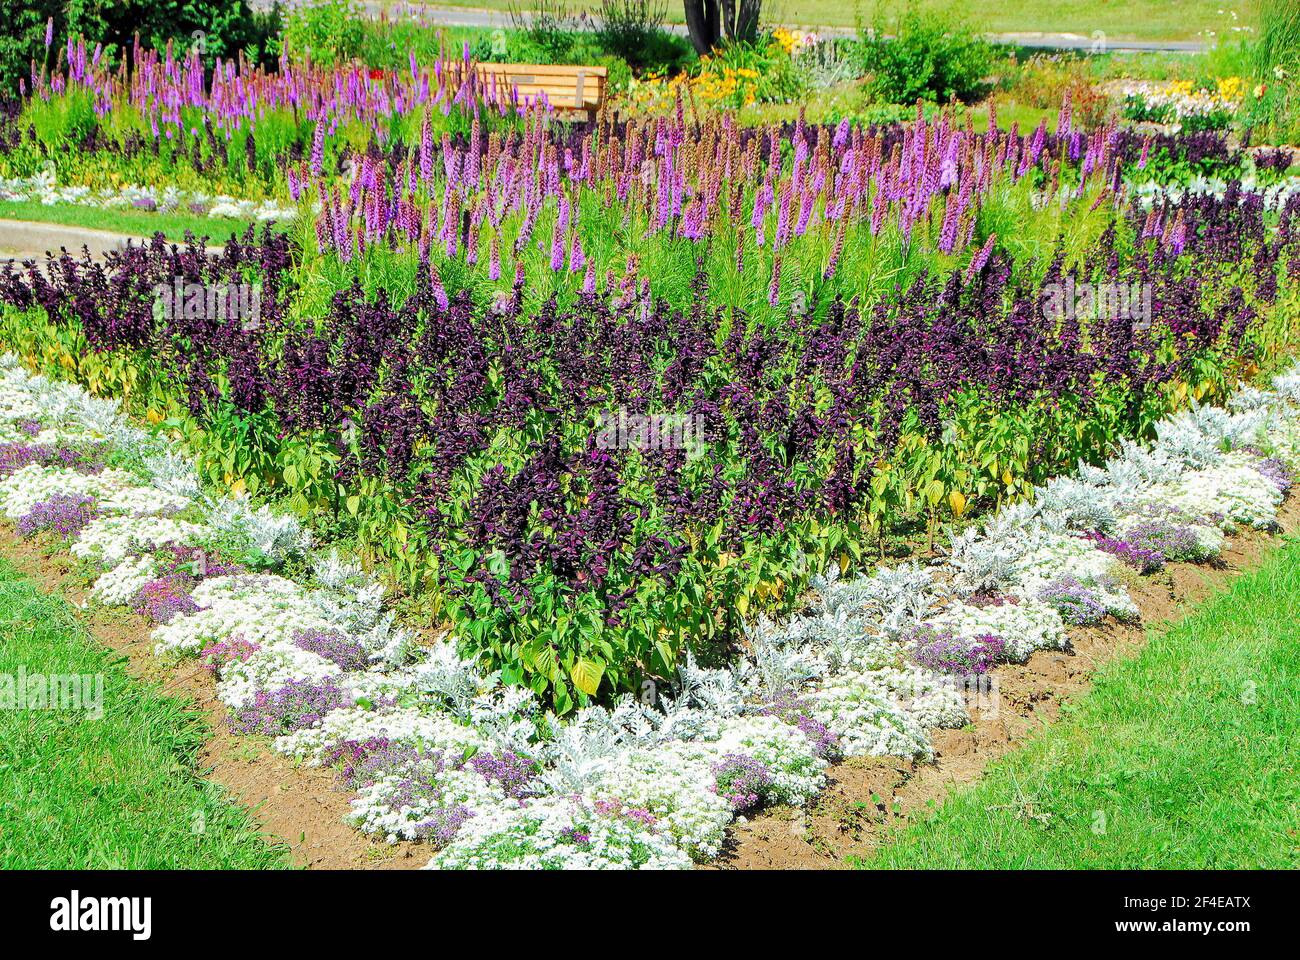 Dark burgandy and magenta flowers in flower beds edged by white and purple alyssum low growing flowers. Stock Photo